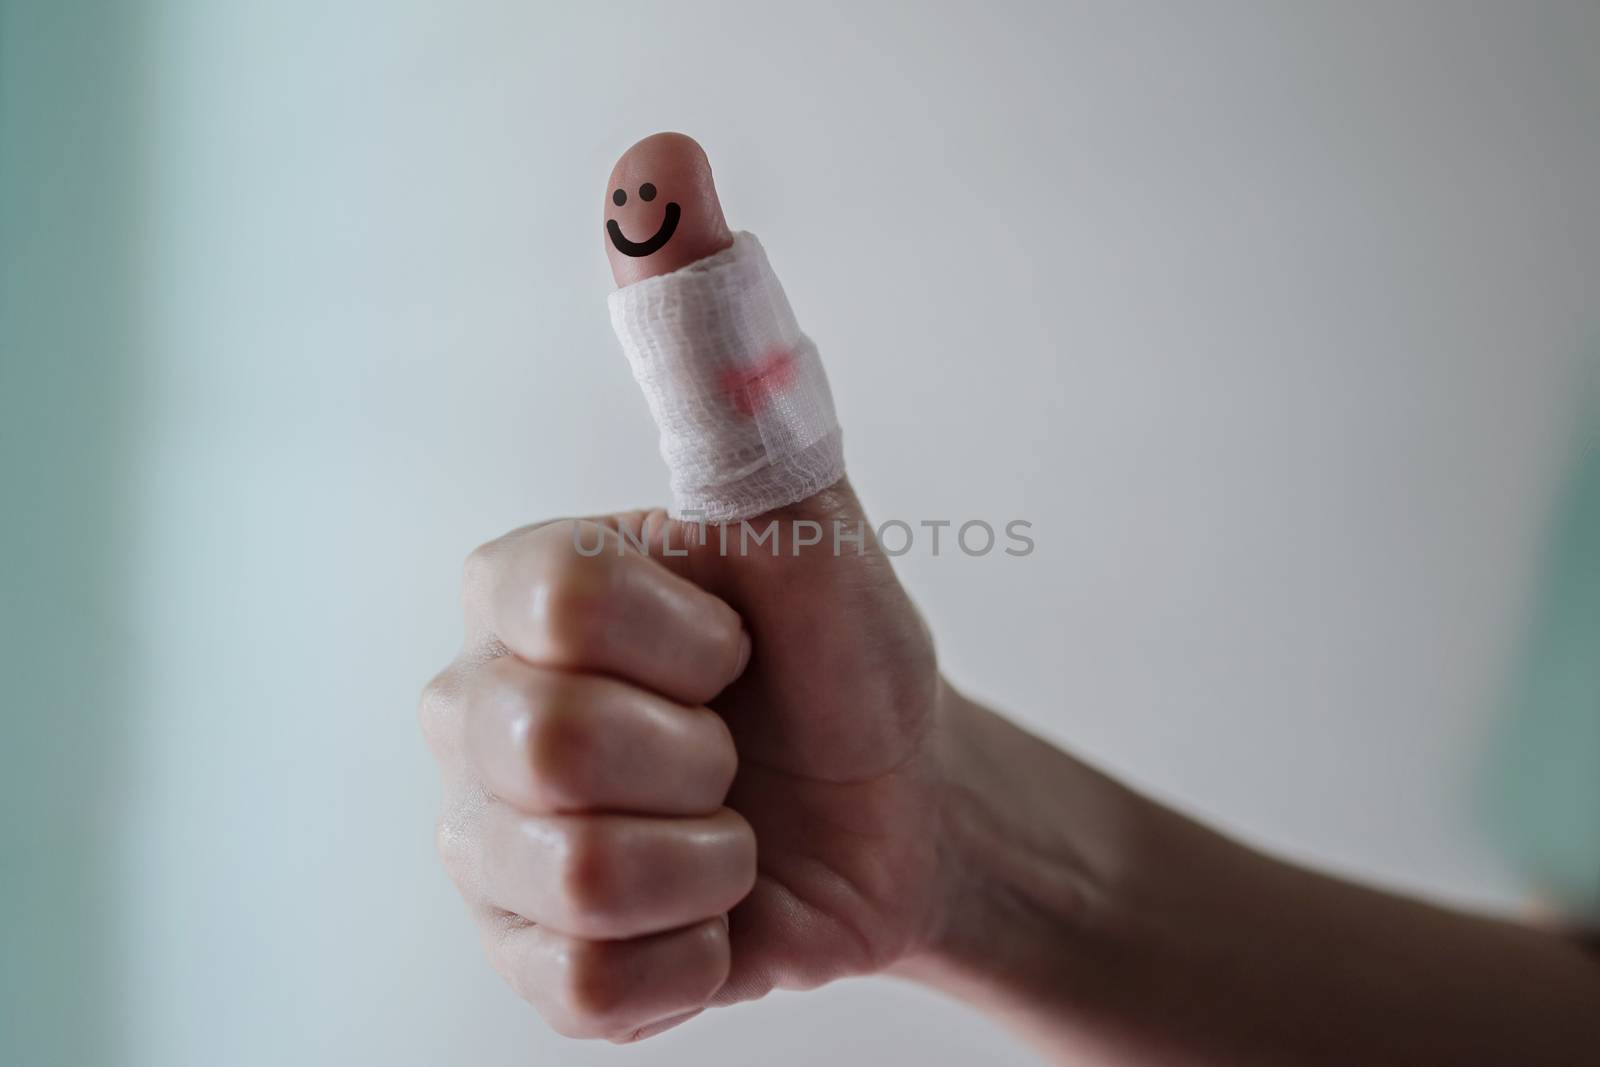 Happy and Positive Concept. Think Positive in Everyday Life. Fingers on First aid Bandaging with Strongly and Happiness Posture 